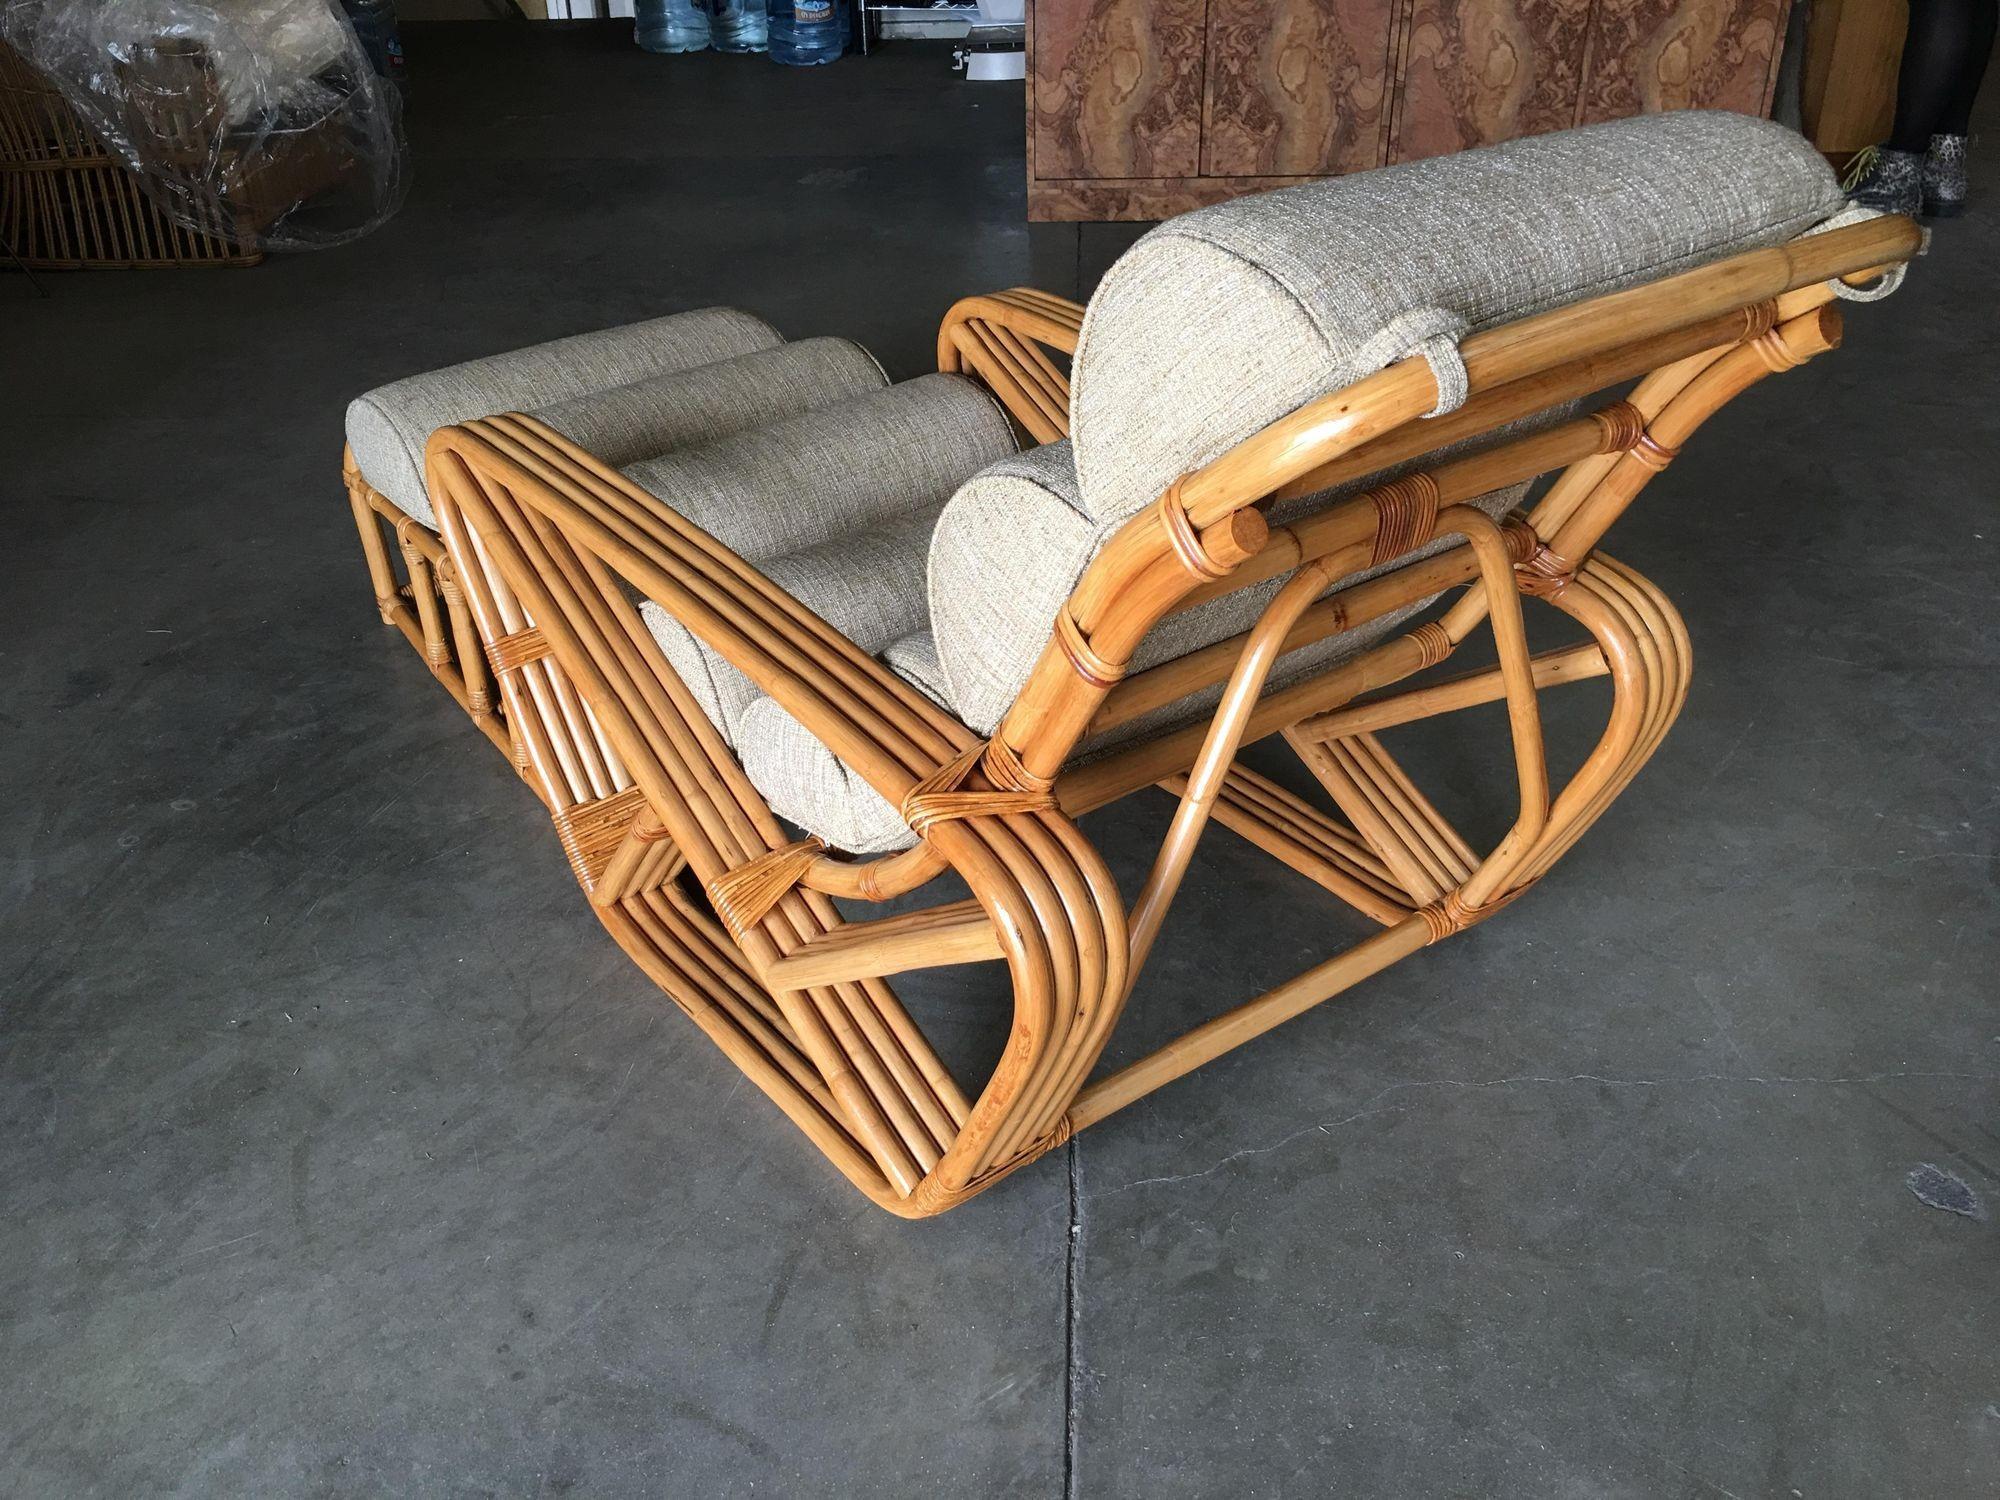 Restored 1940s Rattan 2 Piece Square Pretzel 4-Strand Chaise Lounge In Excellent Condition For Sale In Van Nuys, CA